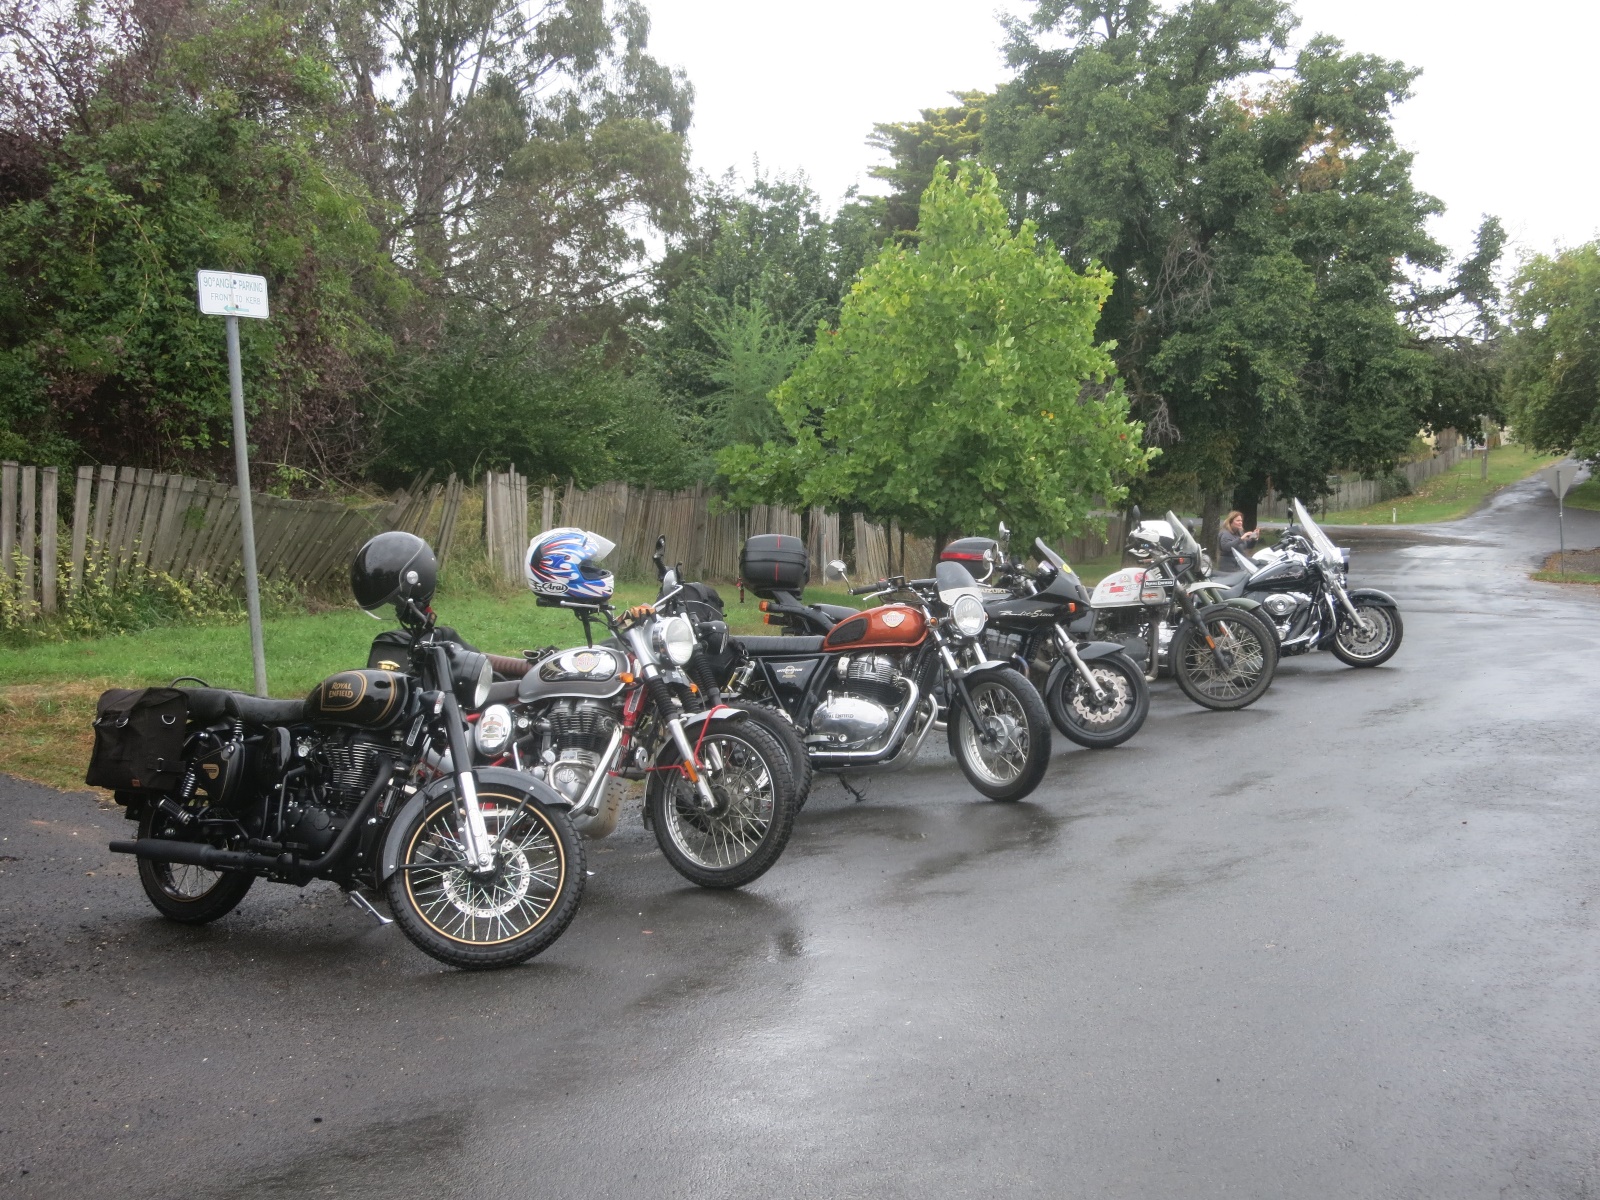 A group of motorcycles parked on the side of a road

Description automatically generated with medium confidence